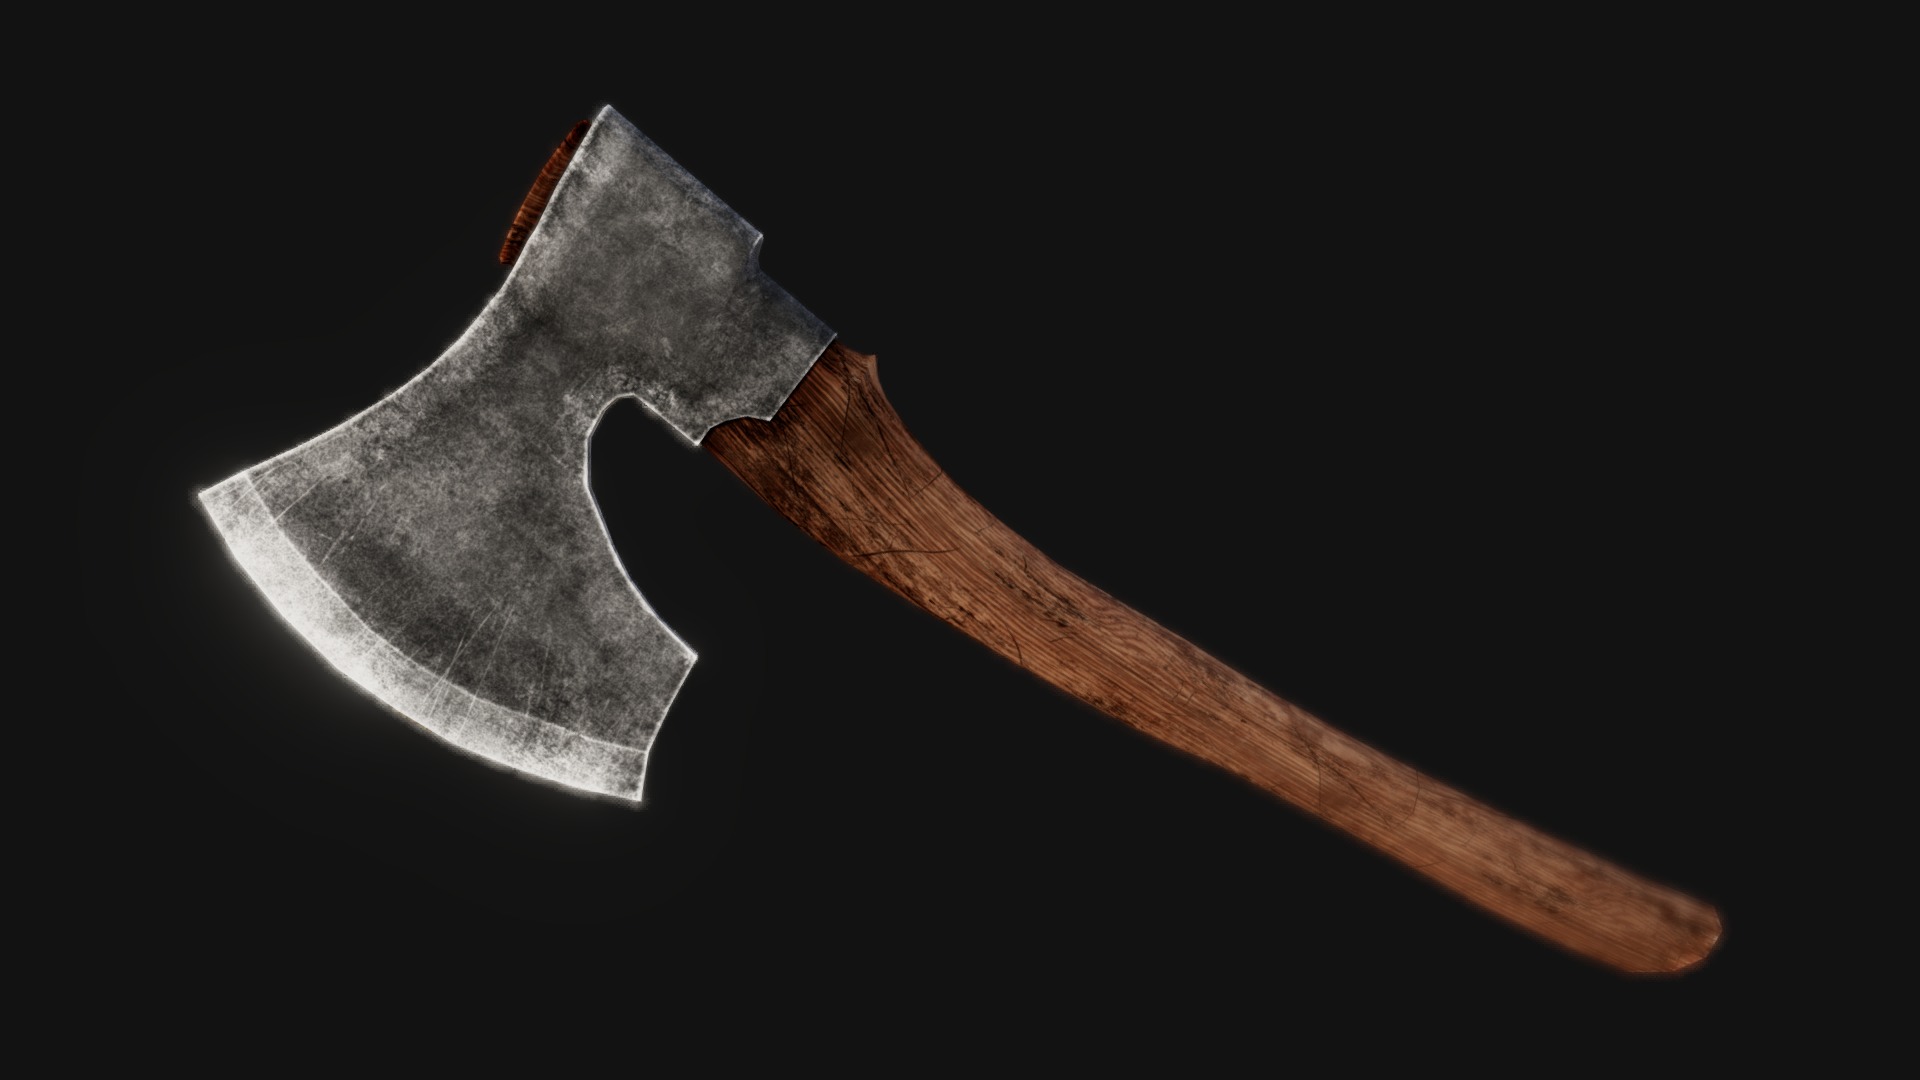 3D model Baltic Broad Axe - This is a 3D model of the Baltic Broad Axe. The 3D model is about a wooden axe with a black background.